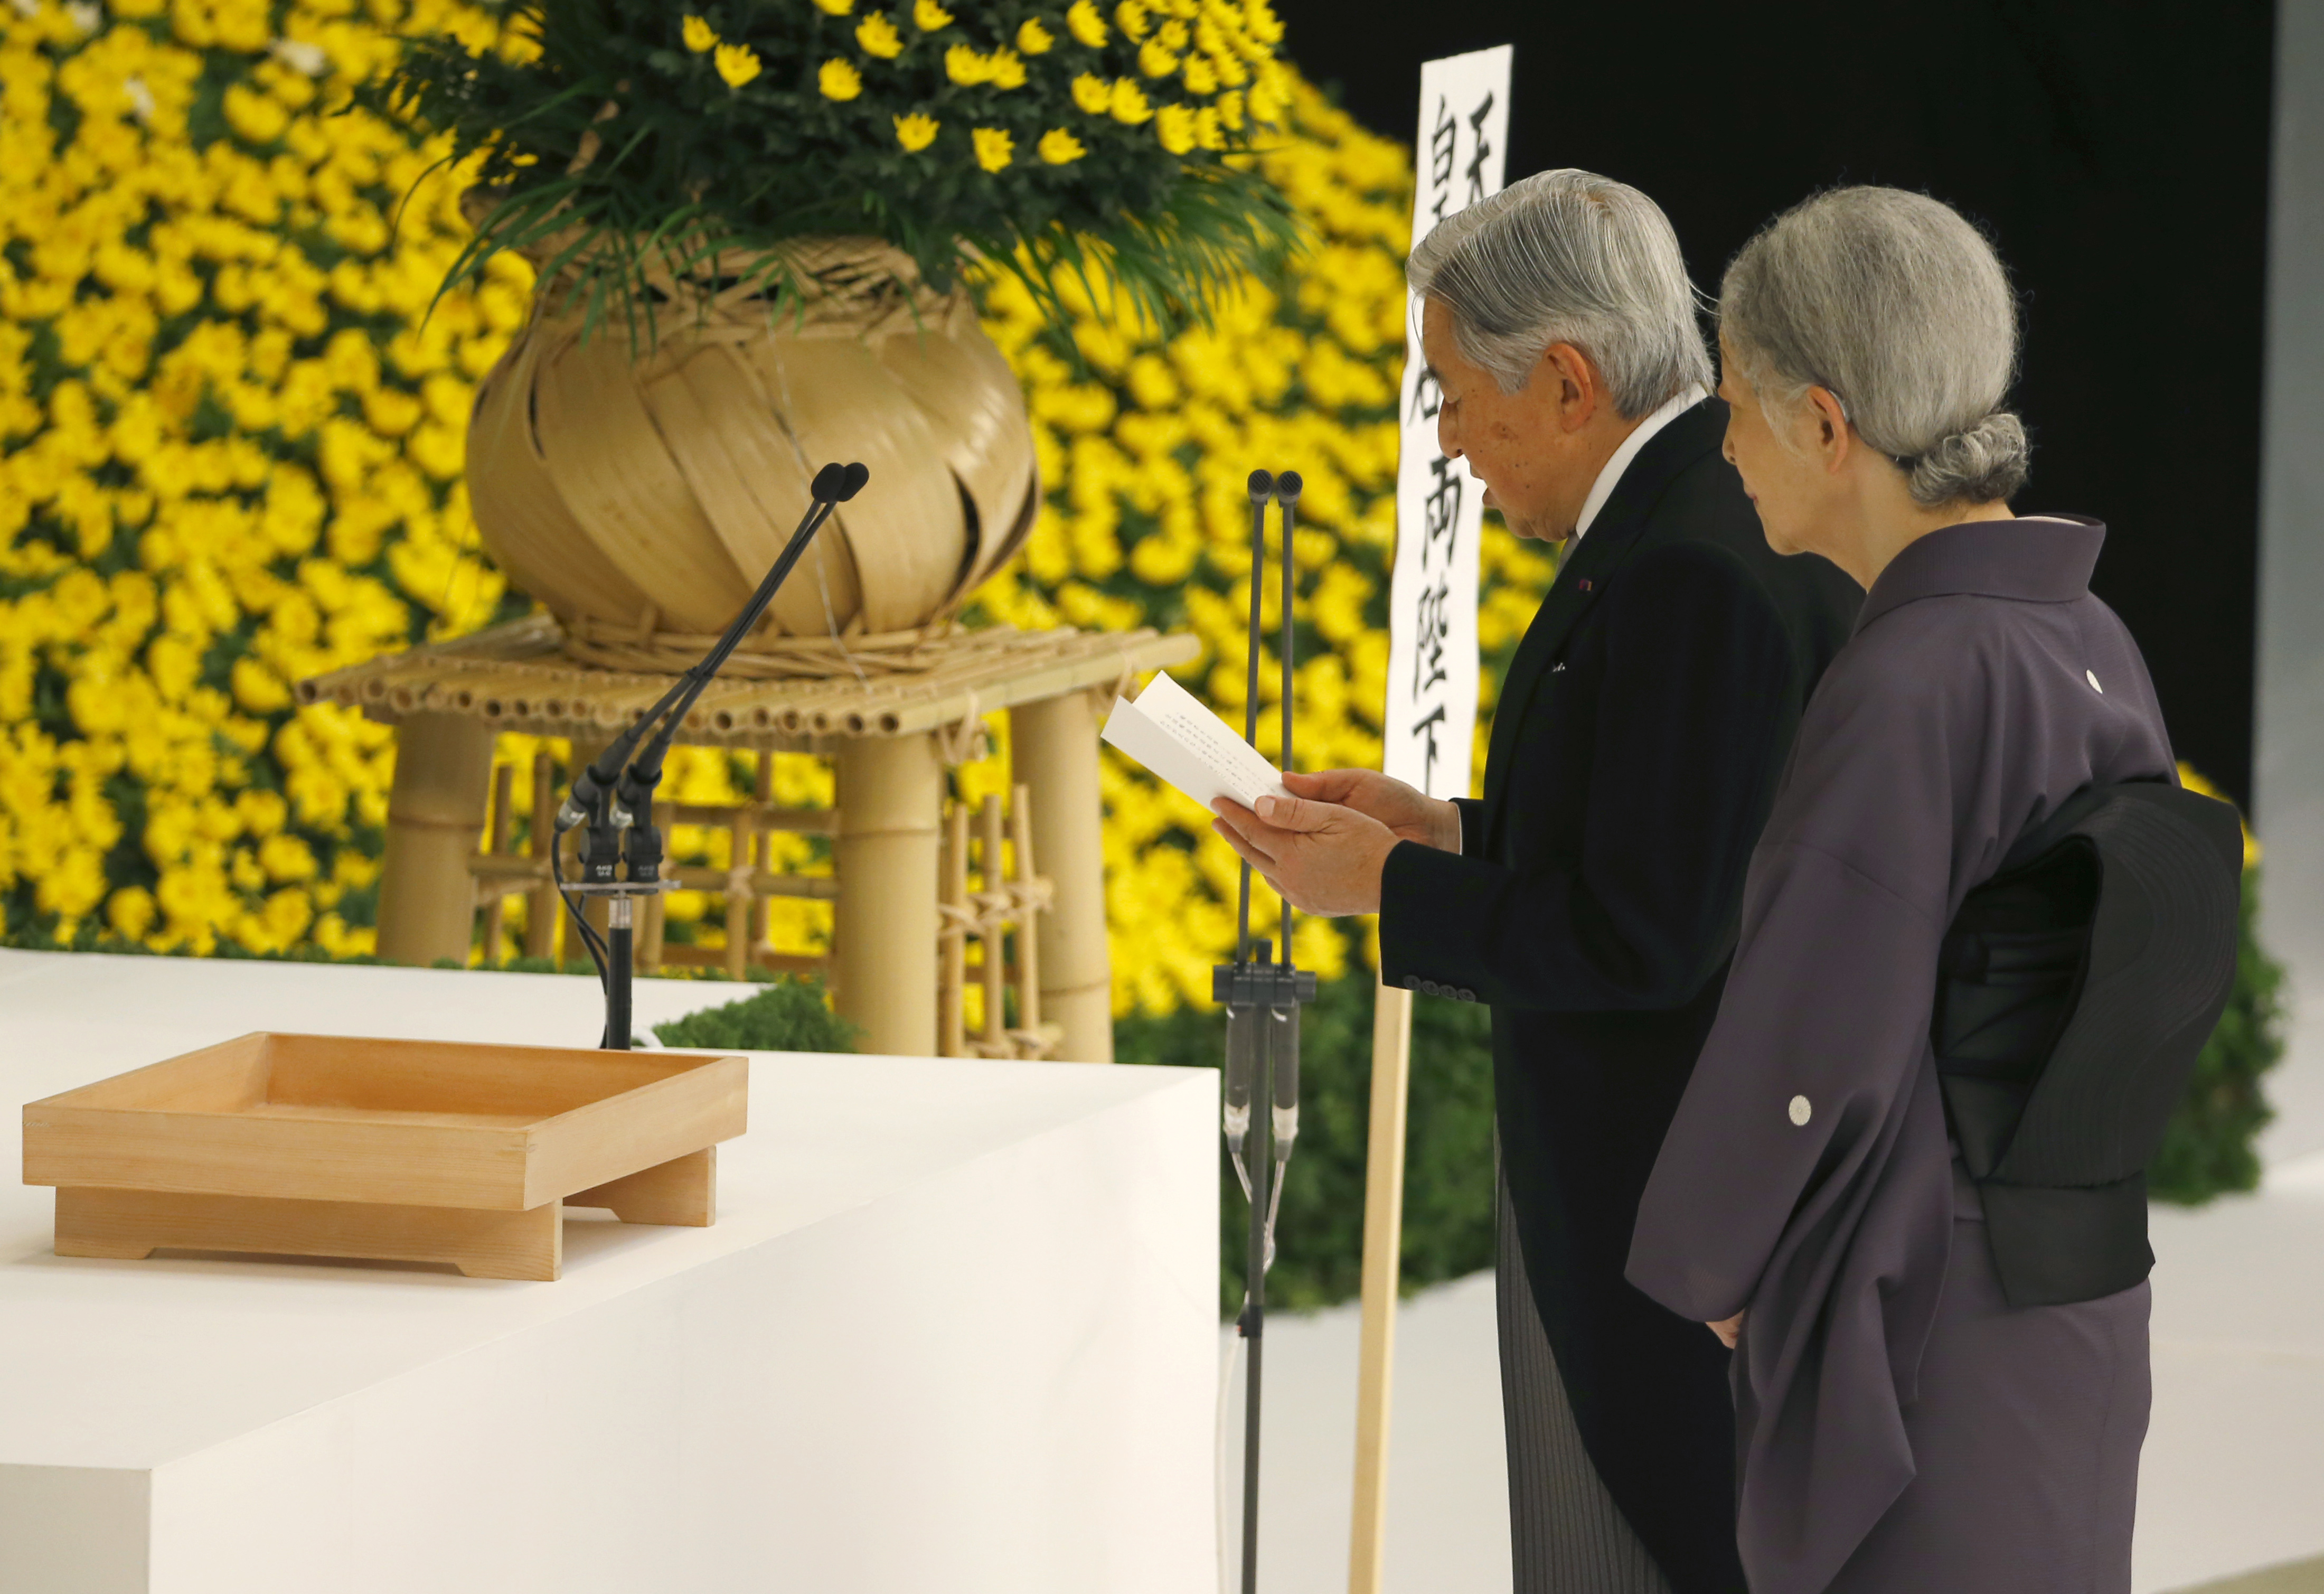 Emperor Akihito delivers his remarks with Empress Michiko during a memorial service at the Nippon Budokan hall in Tokyo on Saturday, the 70th anniversary of the end of World War II. | AP